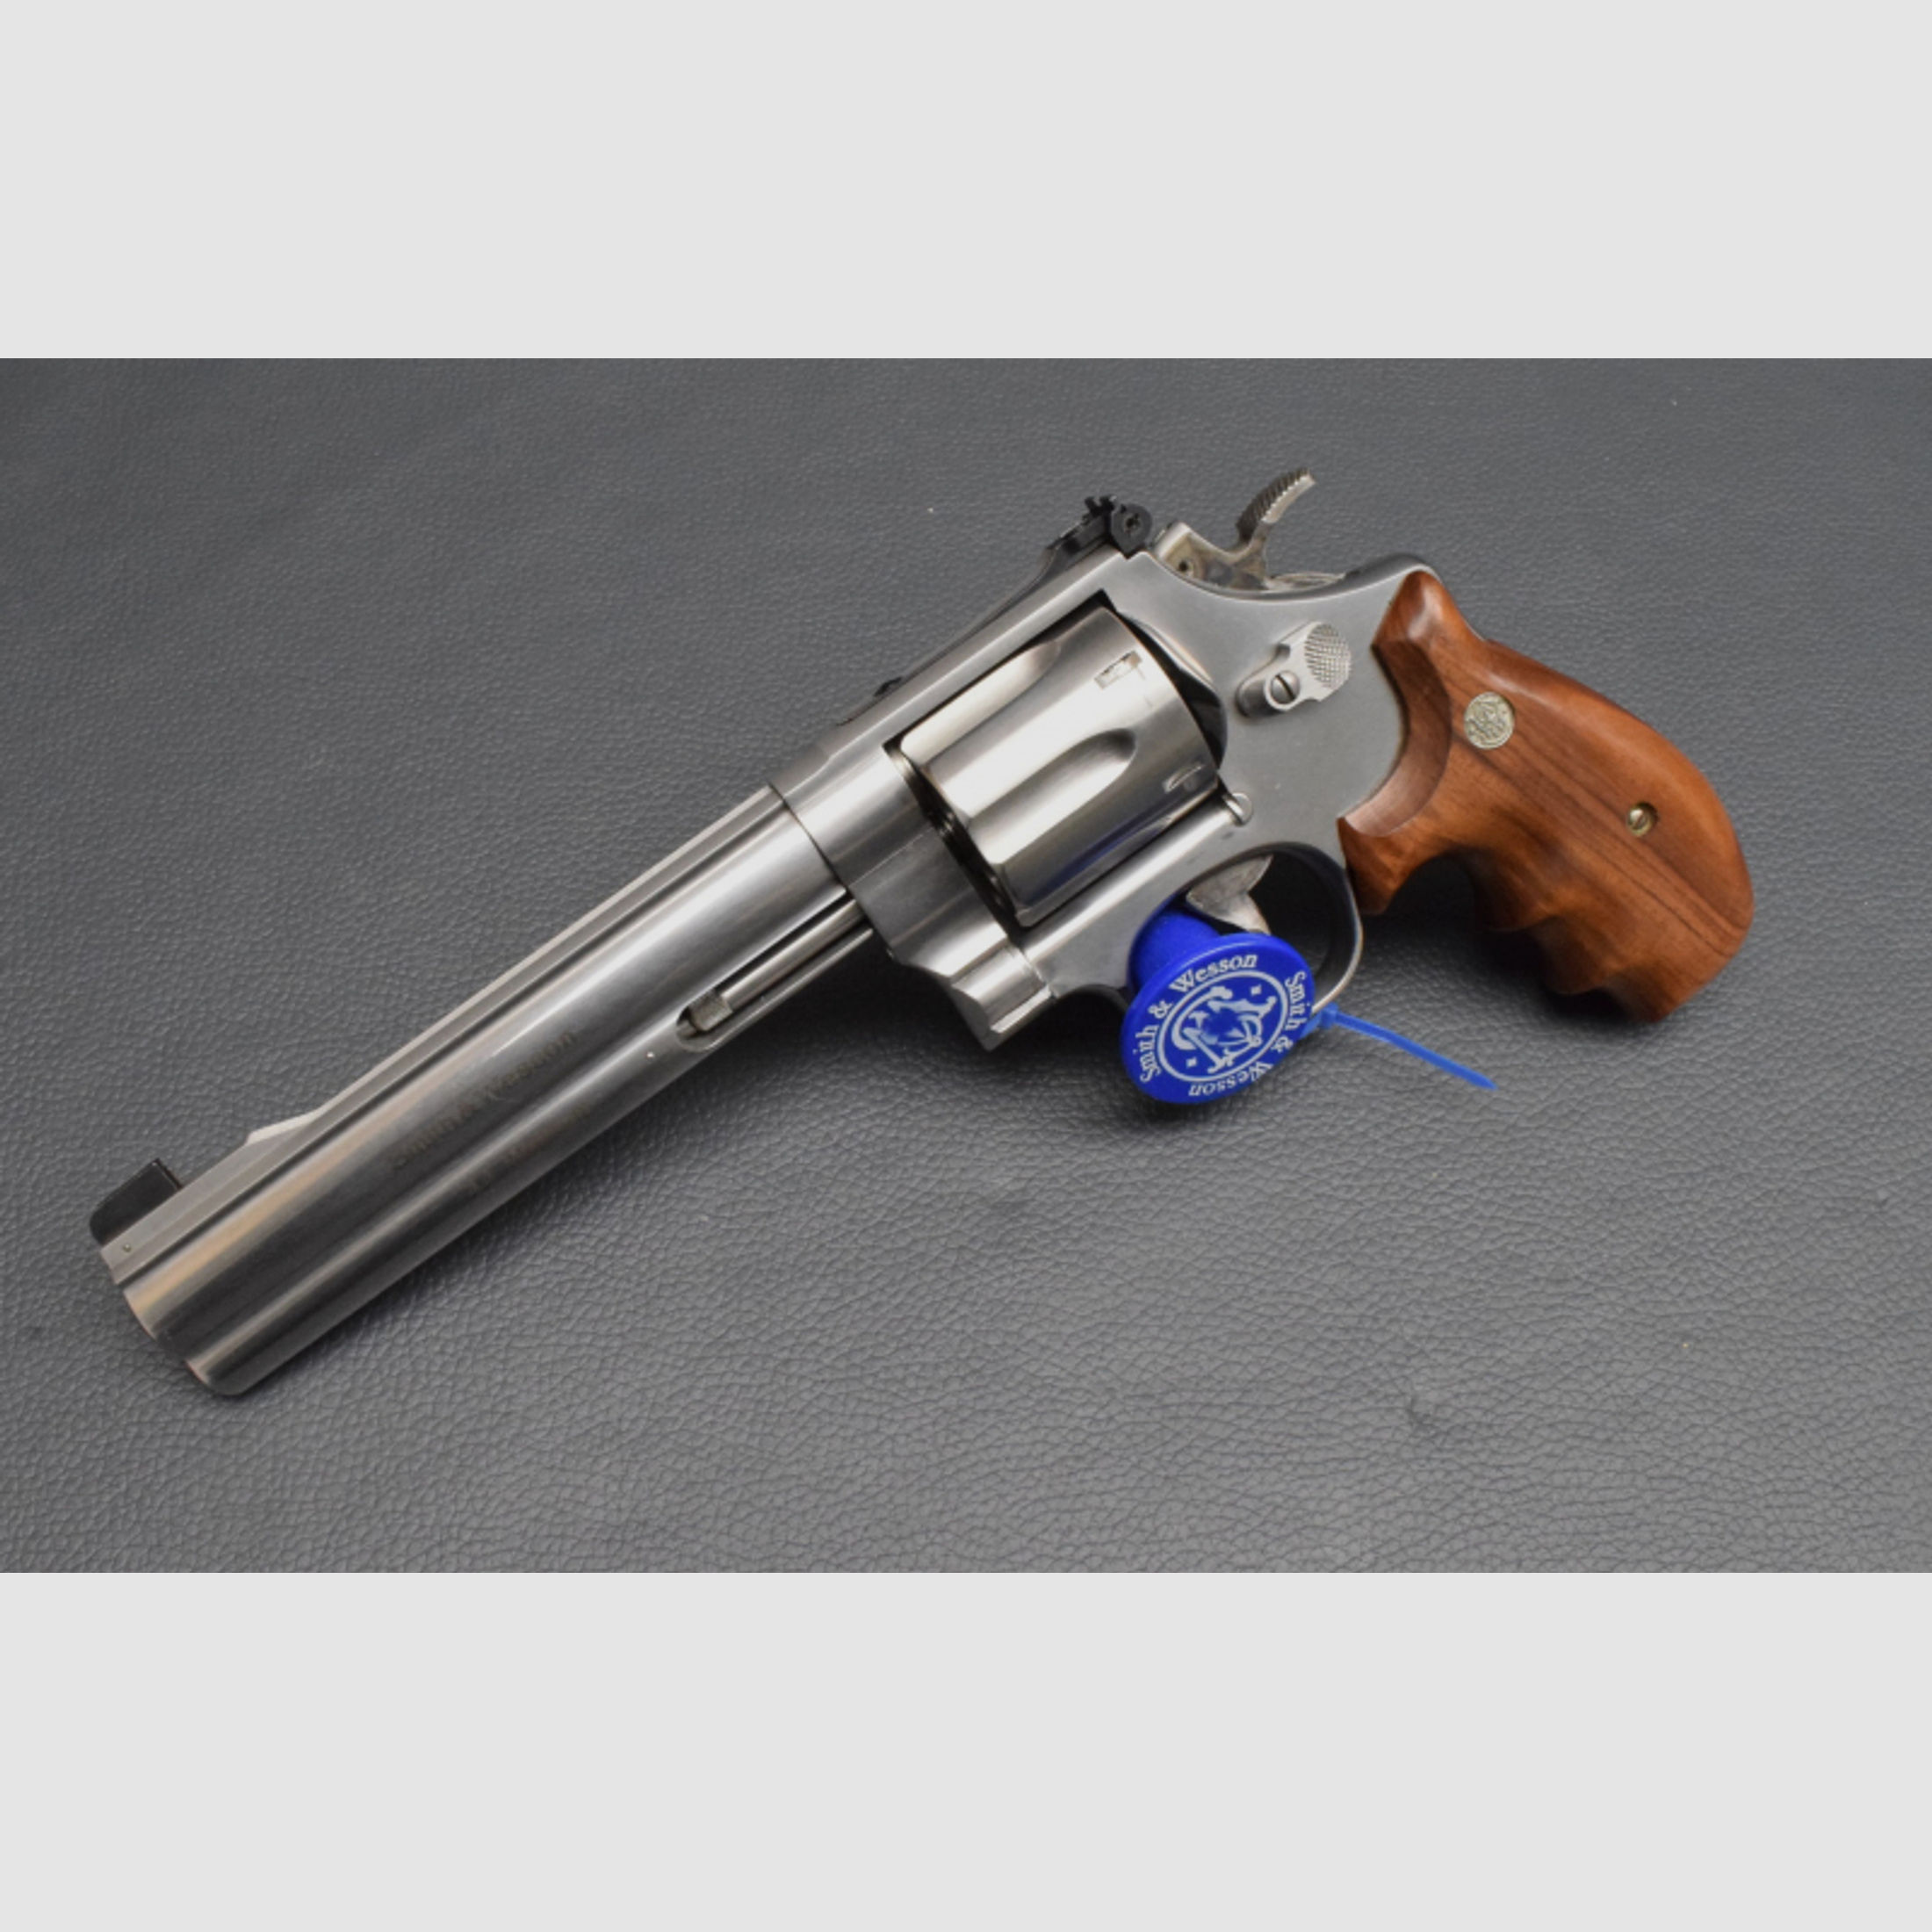 Smith & Wesson Modell 629 Classic DX, 6,5", Kal. 44 Magnum, sehr gut